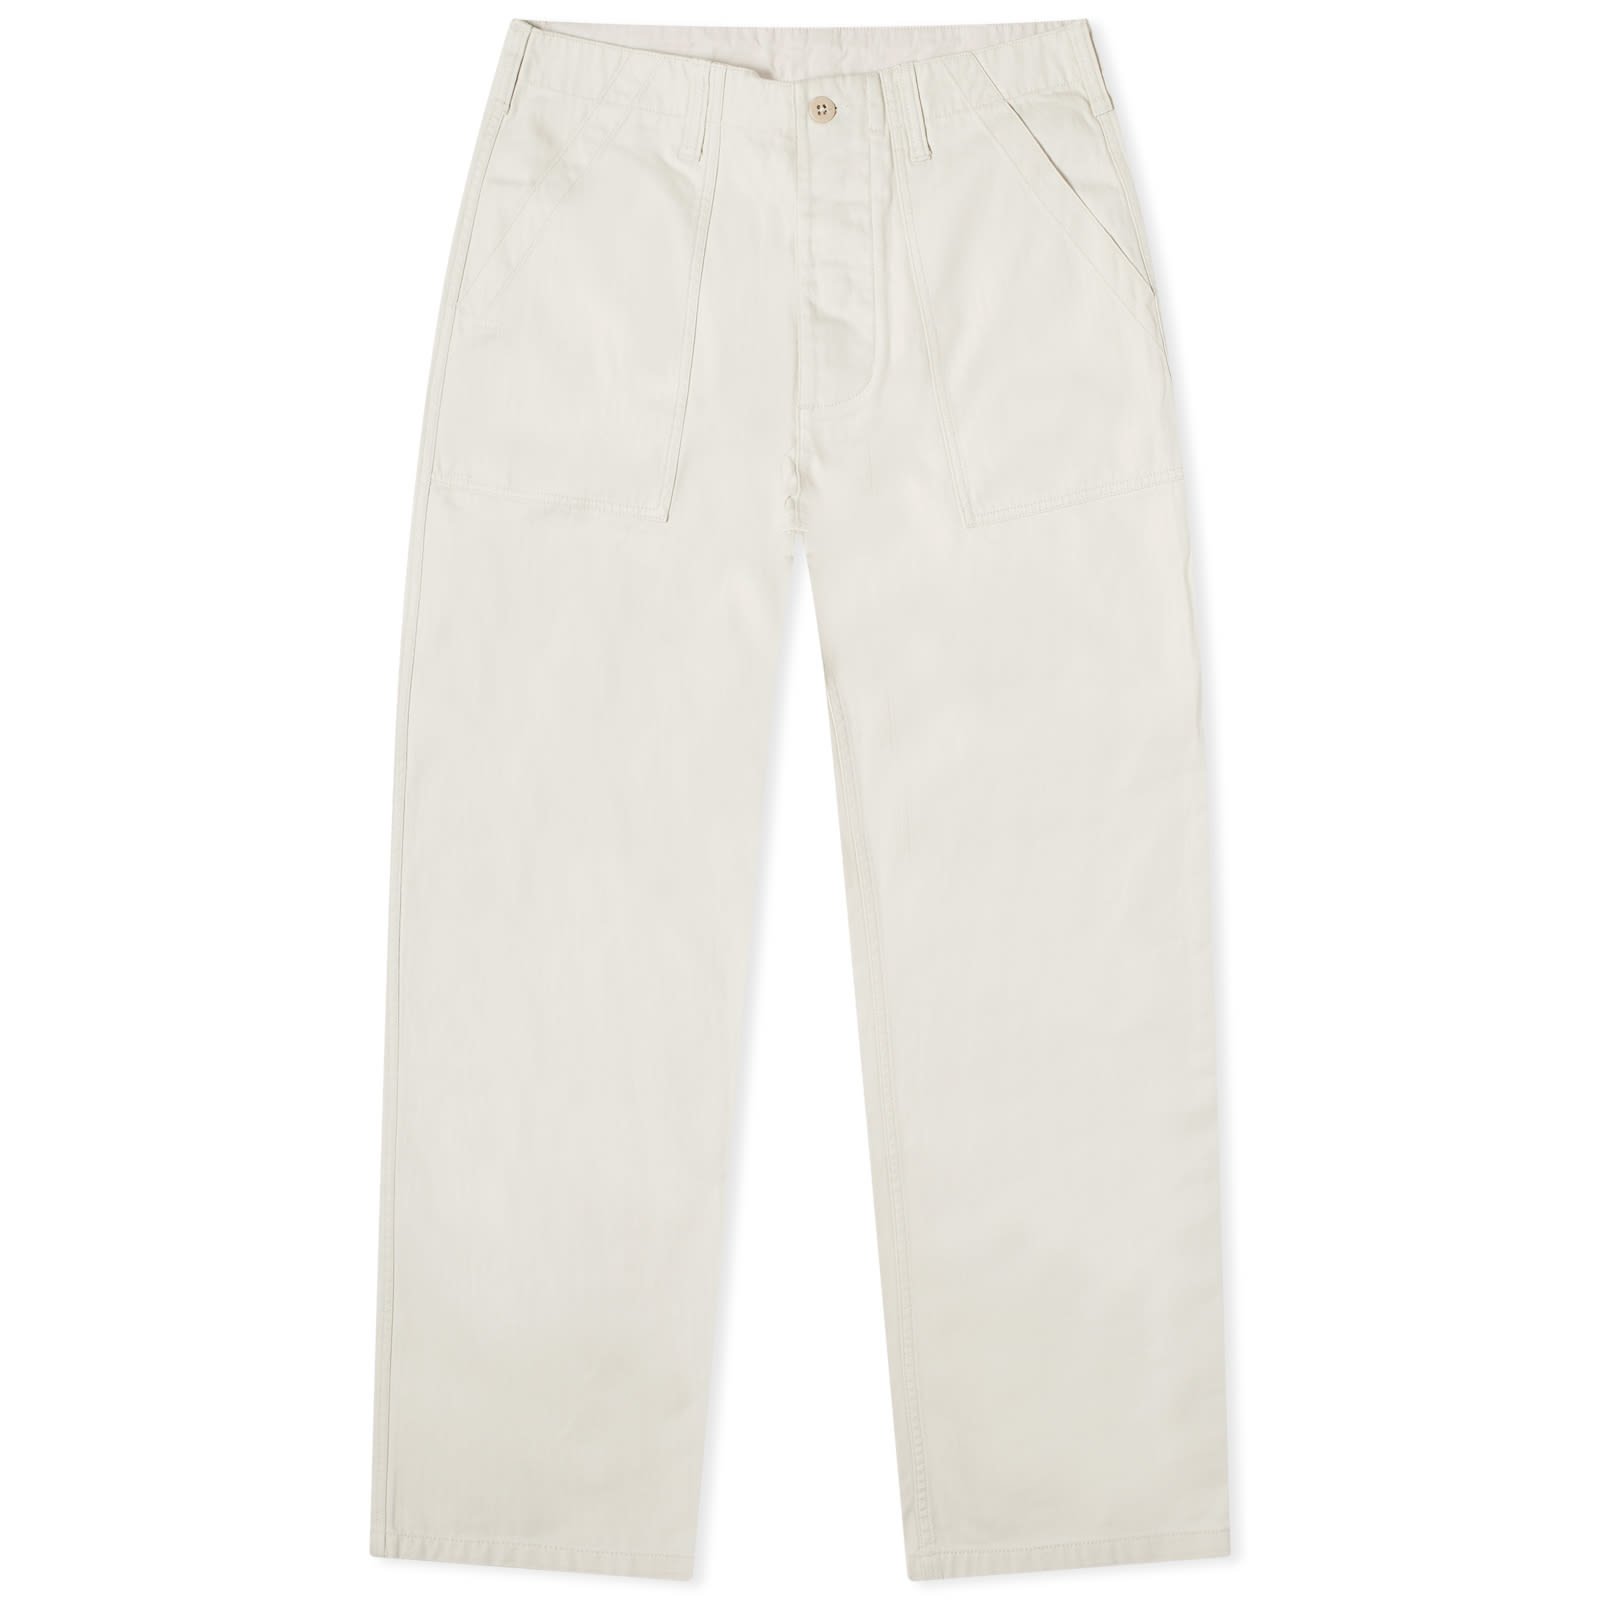 Life Fatigue Pants in Light Orewood Brown